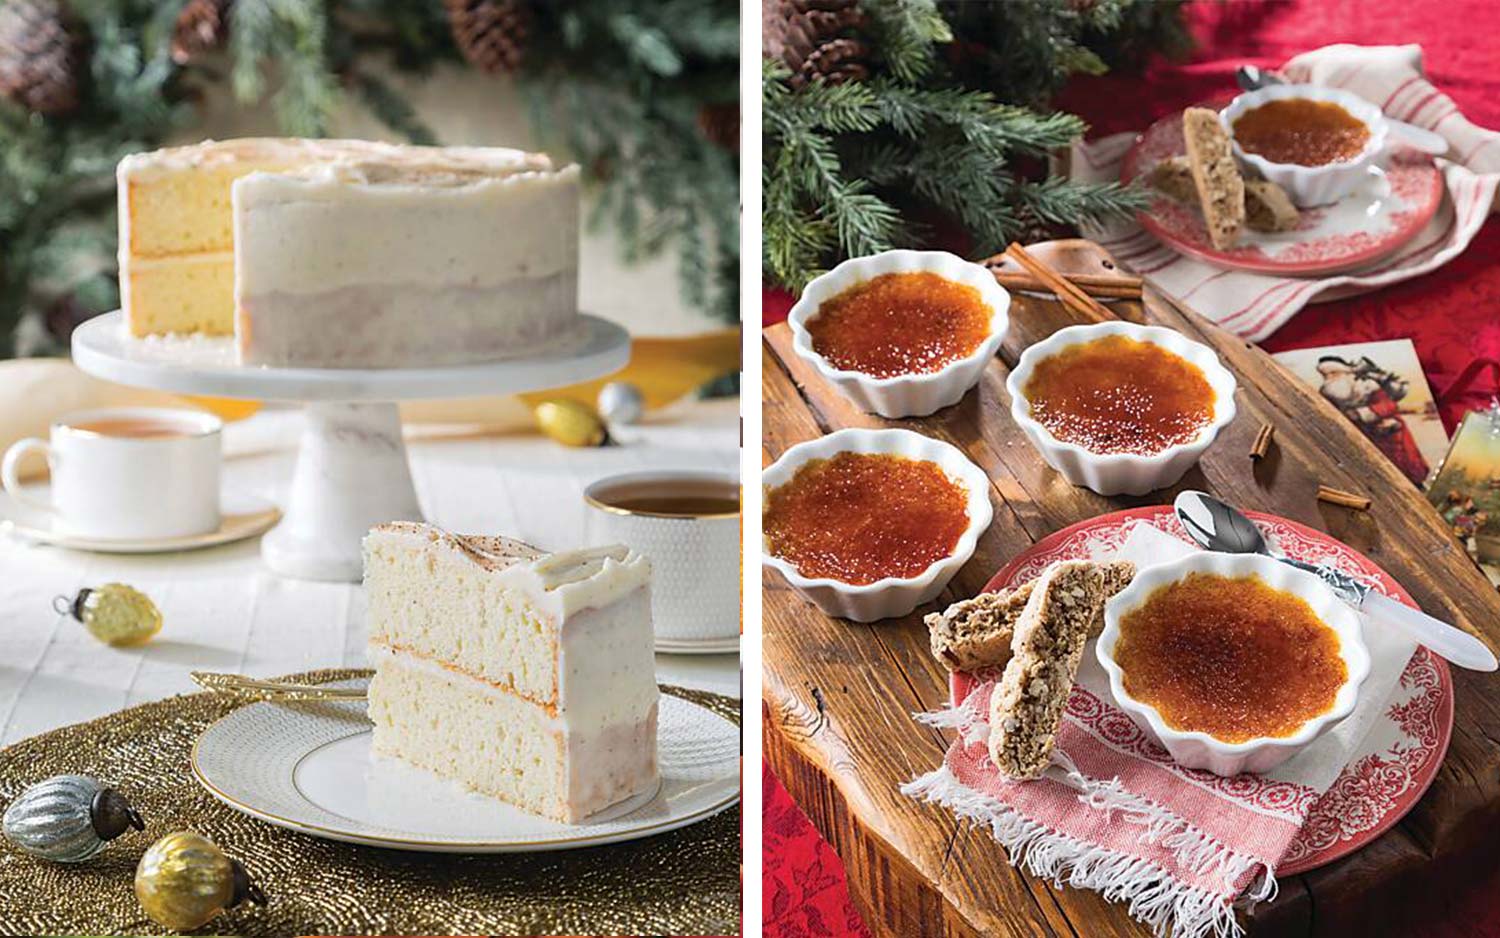 18 Sumptuous Holiday Sides, Starters, and Desserts